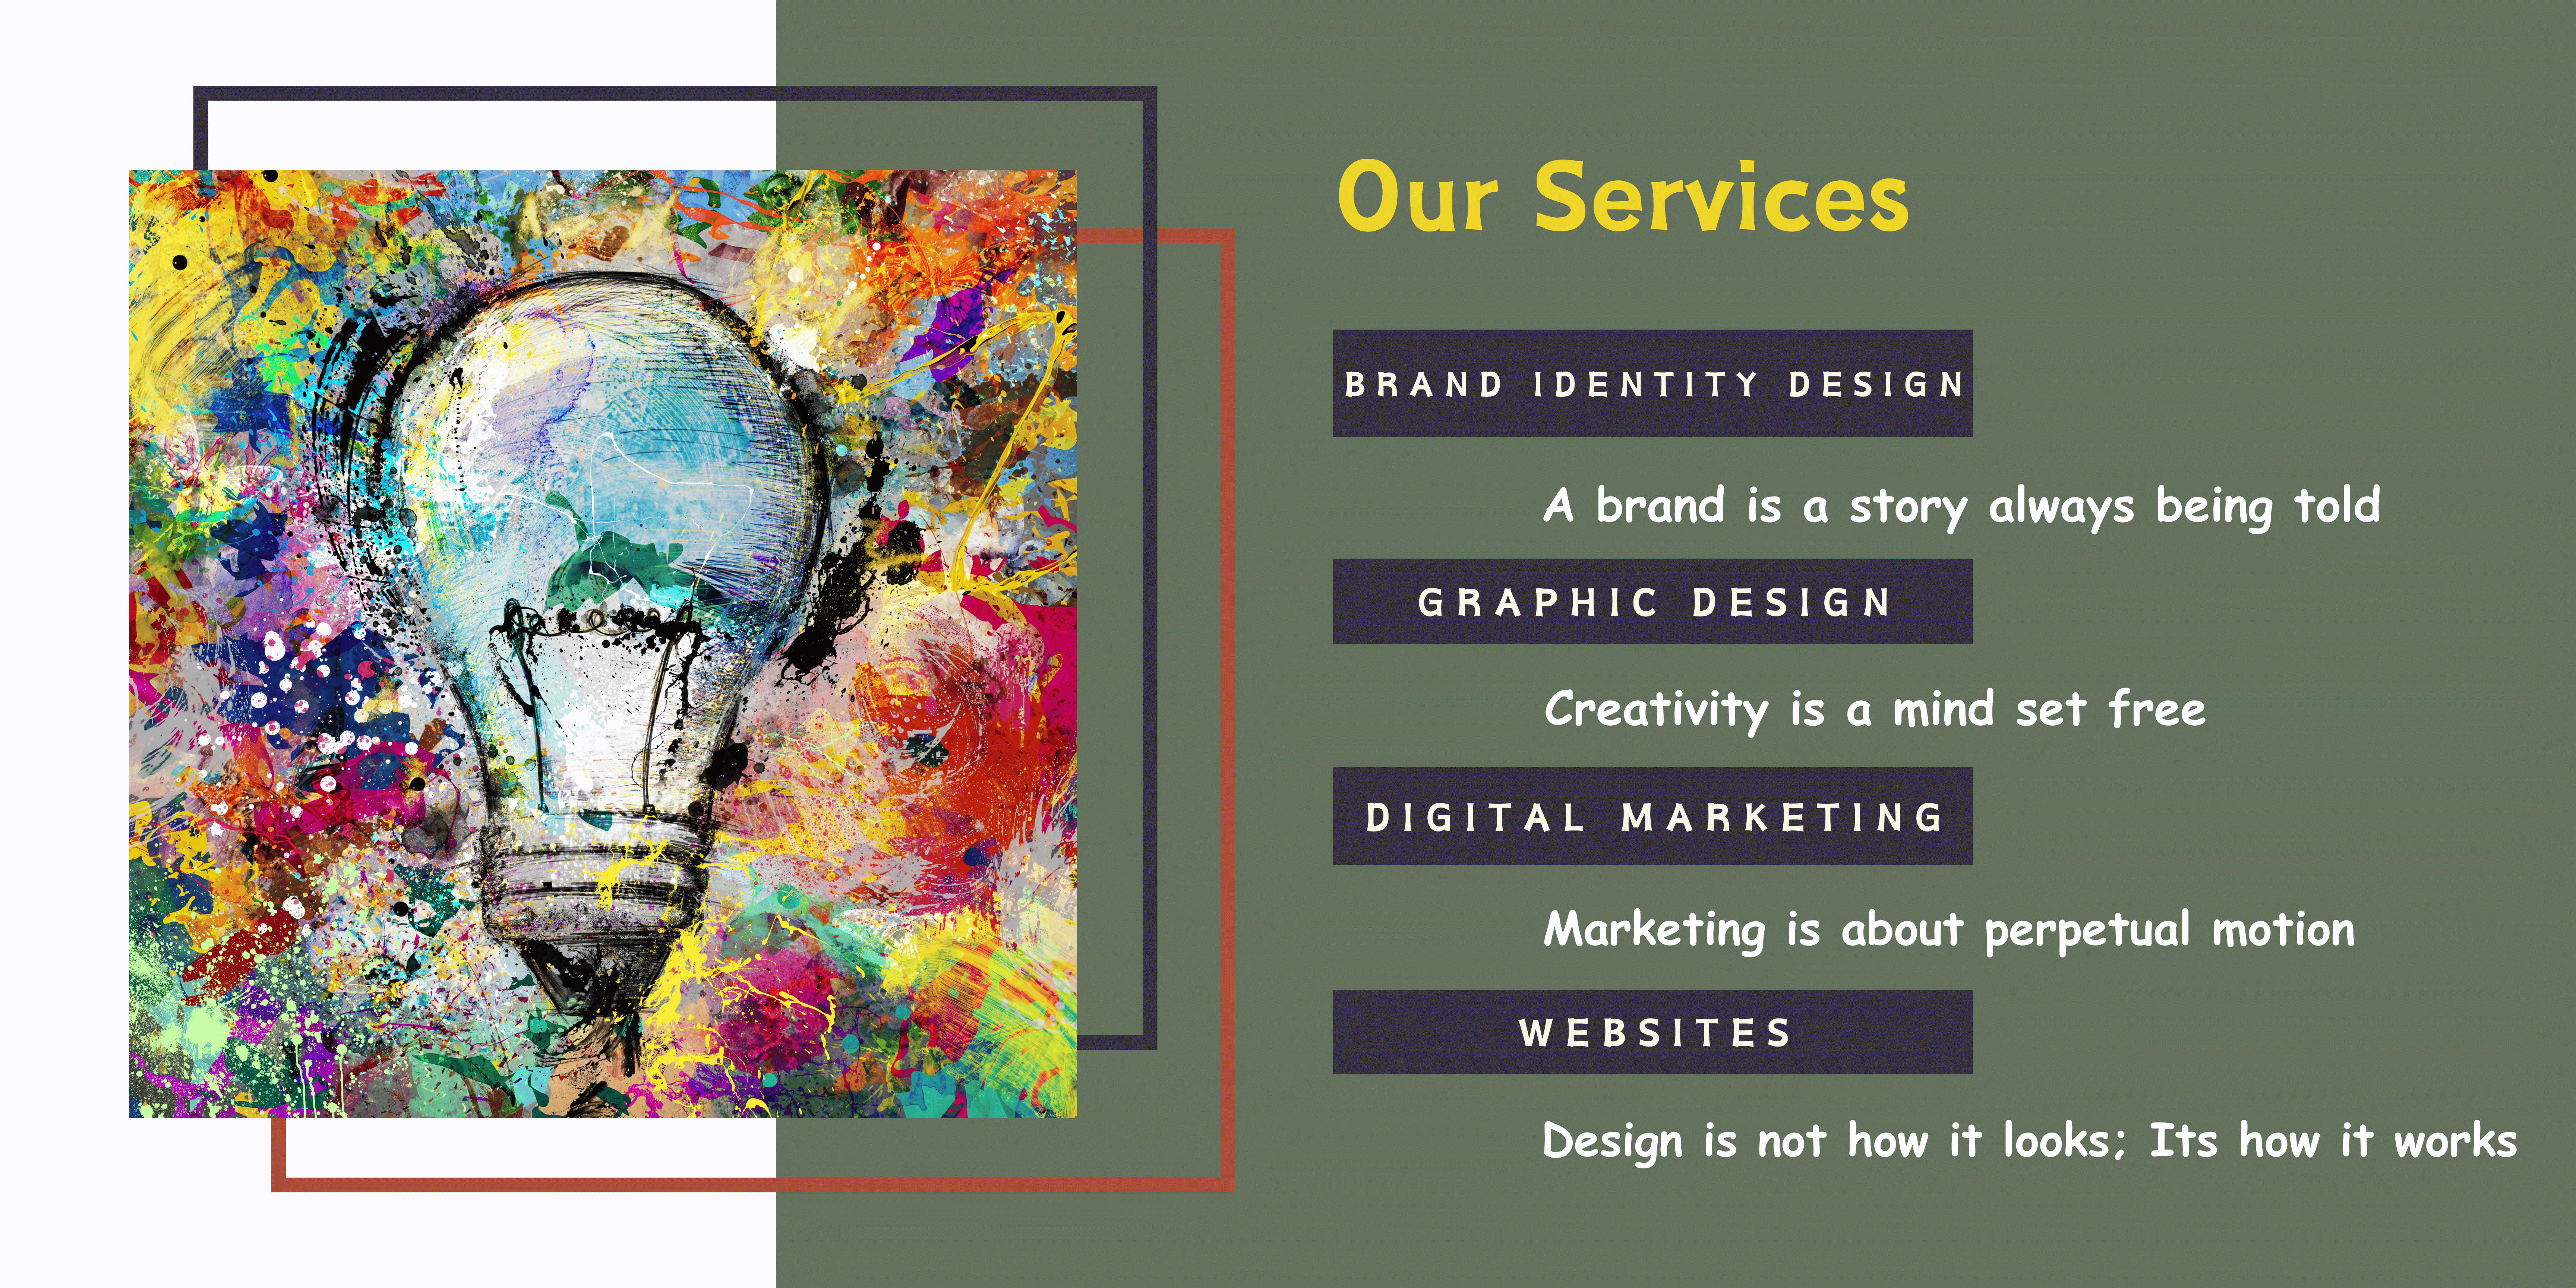 Overview of our services including Brand Identity Design, Graphic Design, Digital Marketing, and Web Design